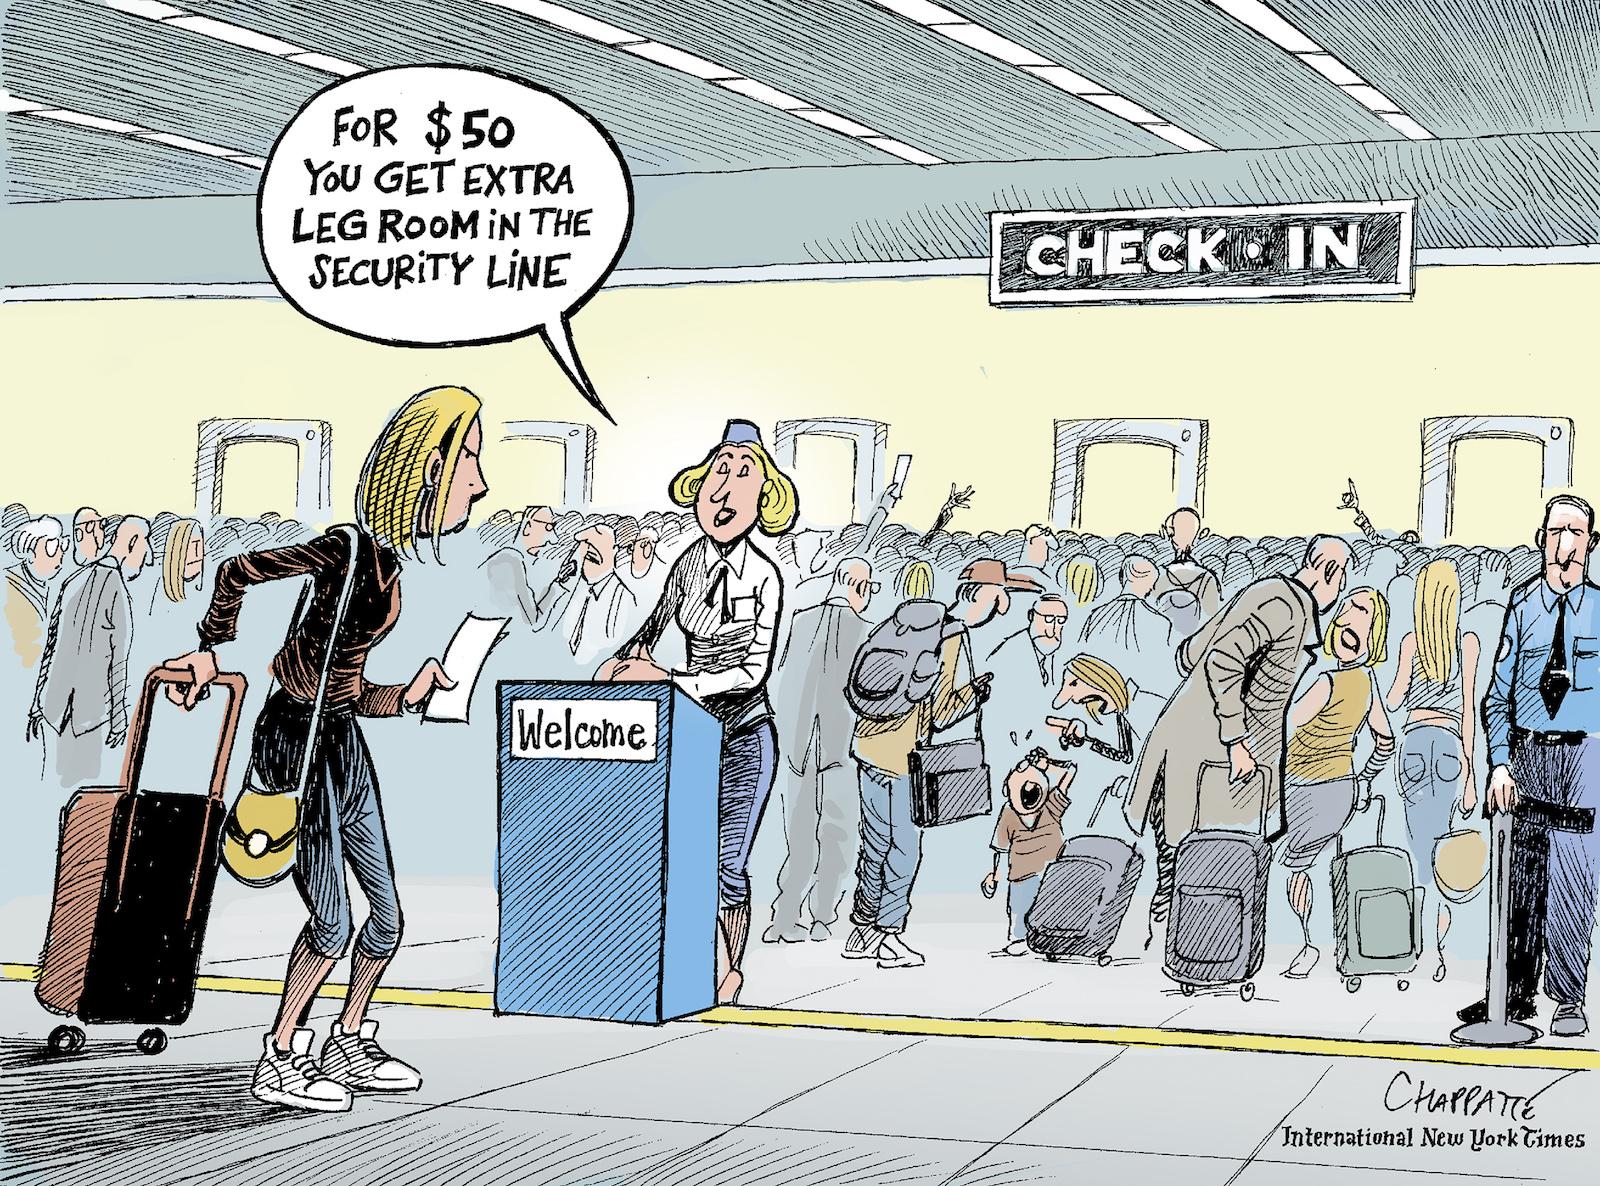 Long lines in airport